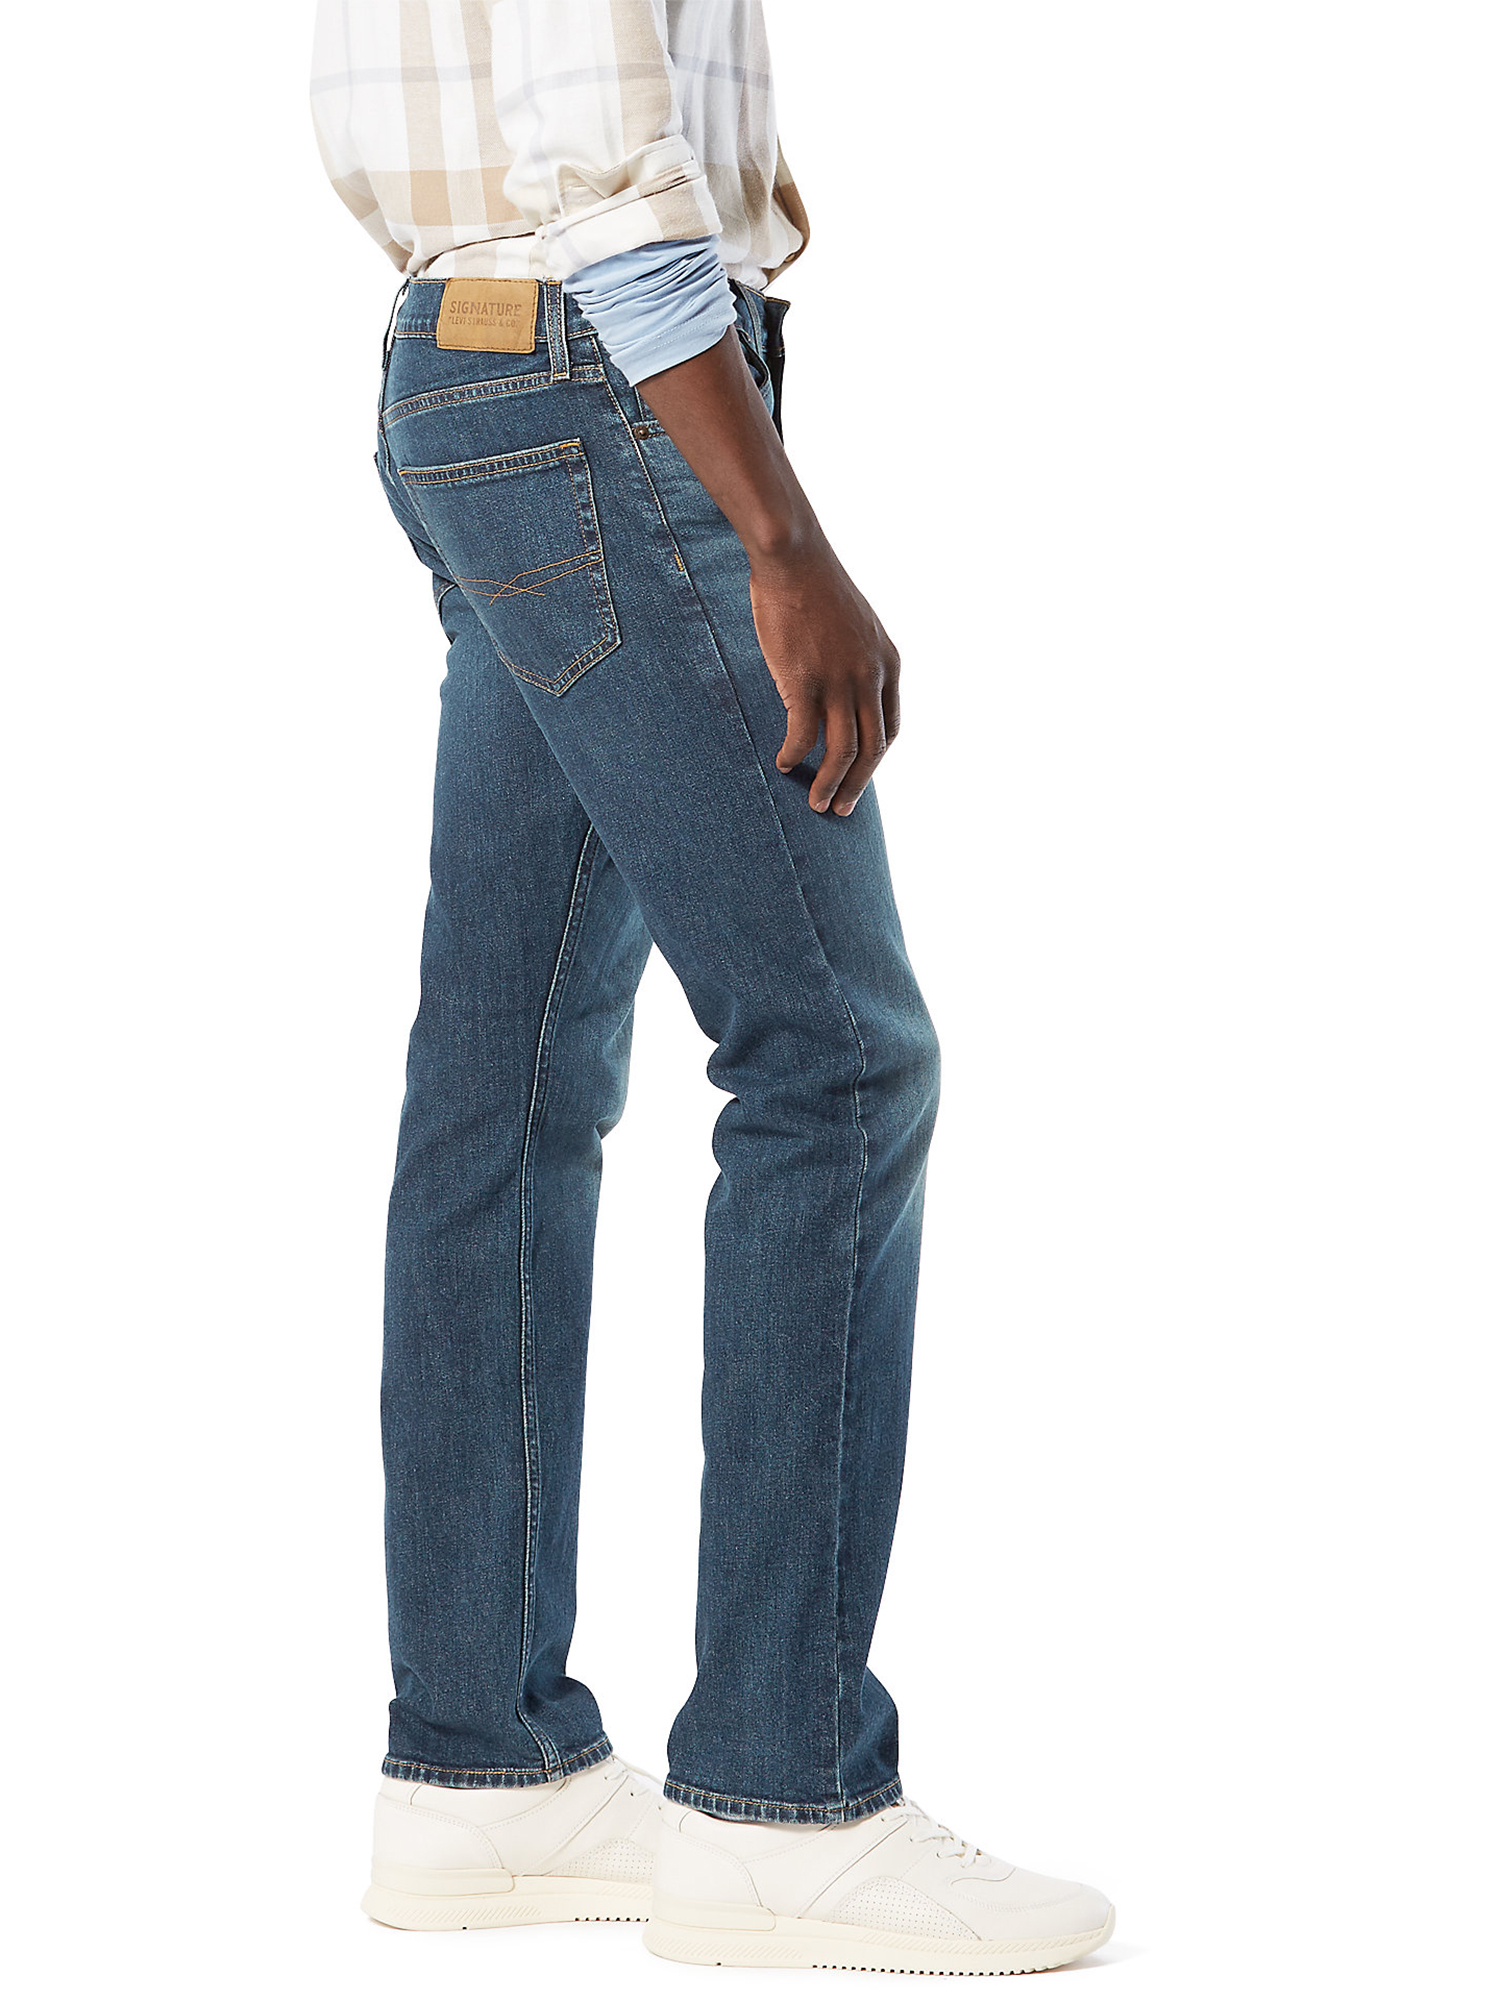 Signature By Levi Strauss & Co. Men's Straight Fit Jeans - image 3 of 5